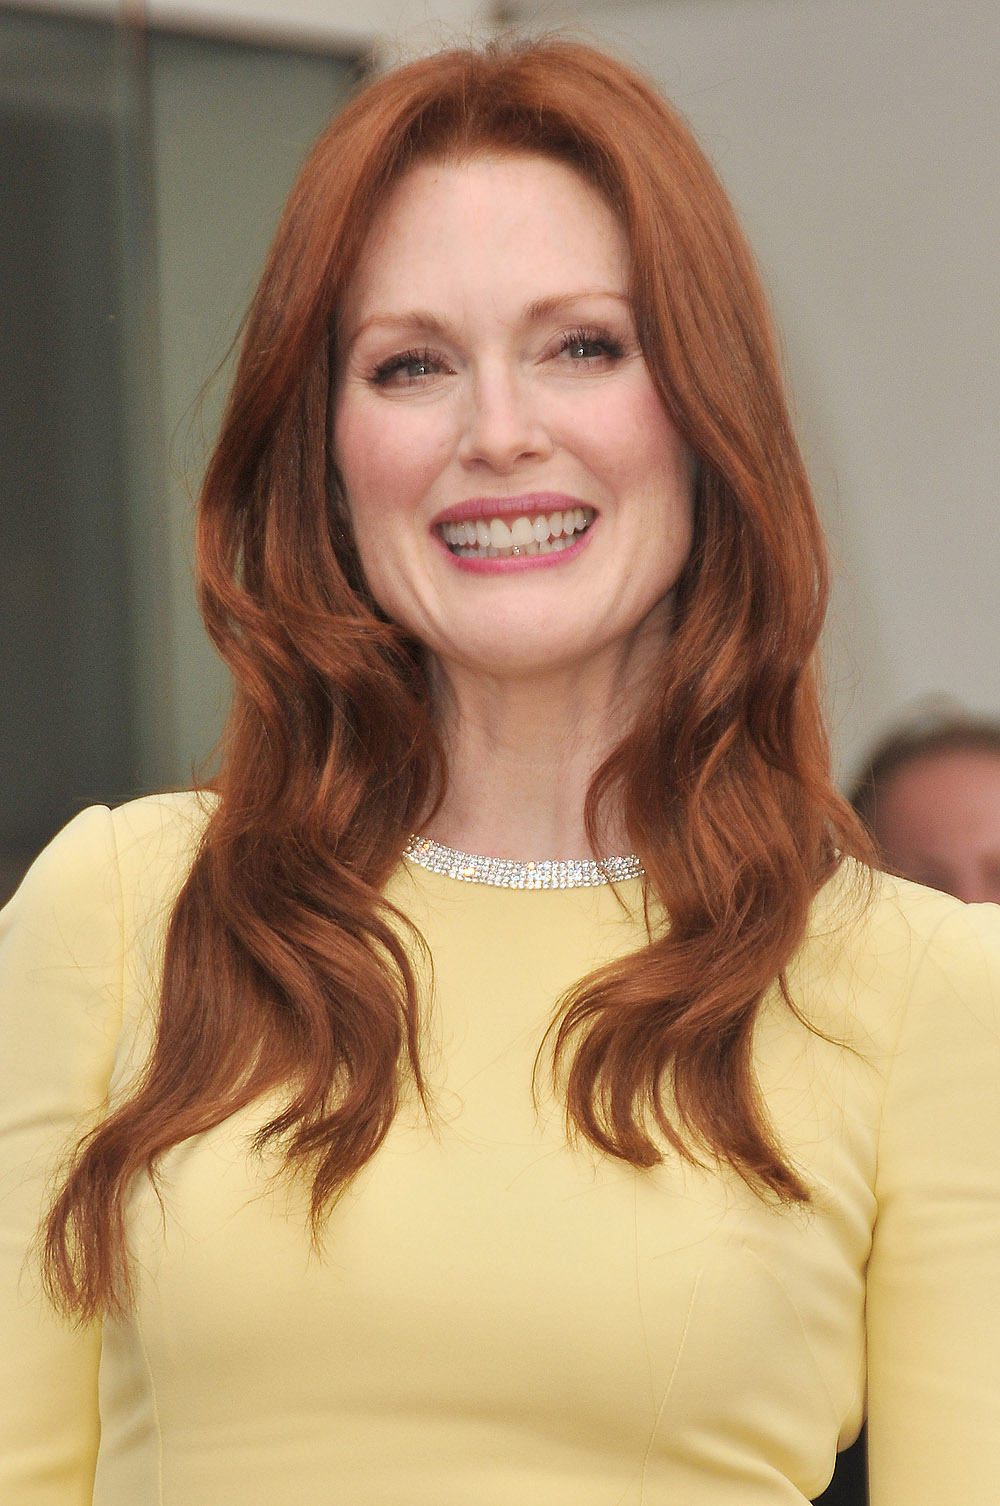 Julianne Moore at the 2,507th Star for Julianne Moore on the Hollywood